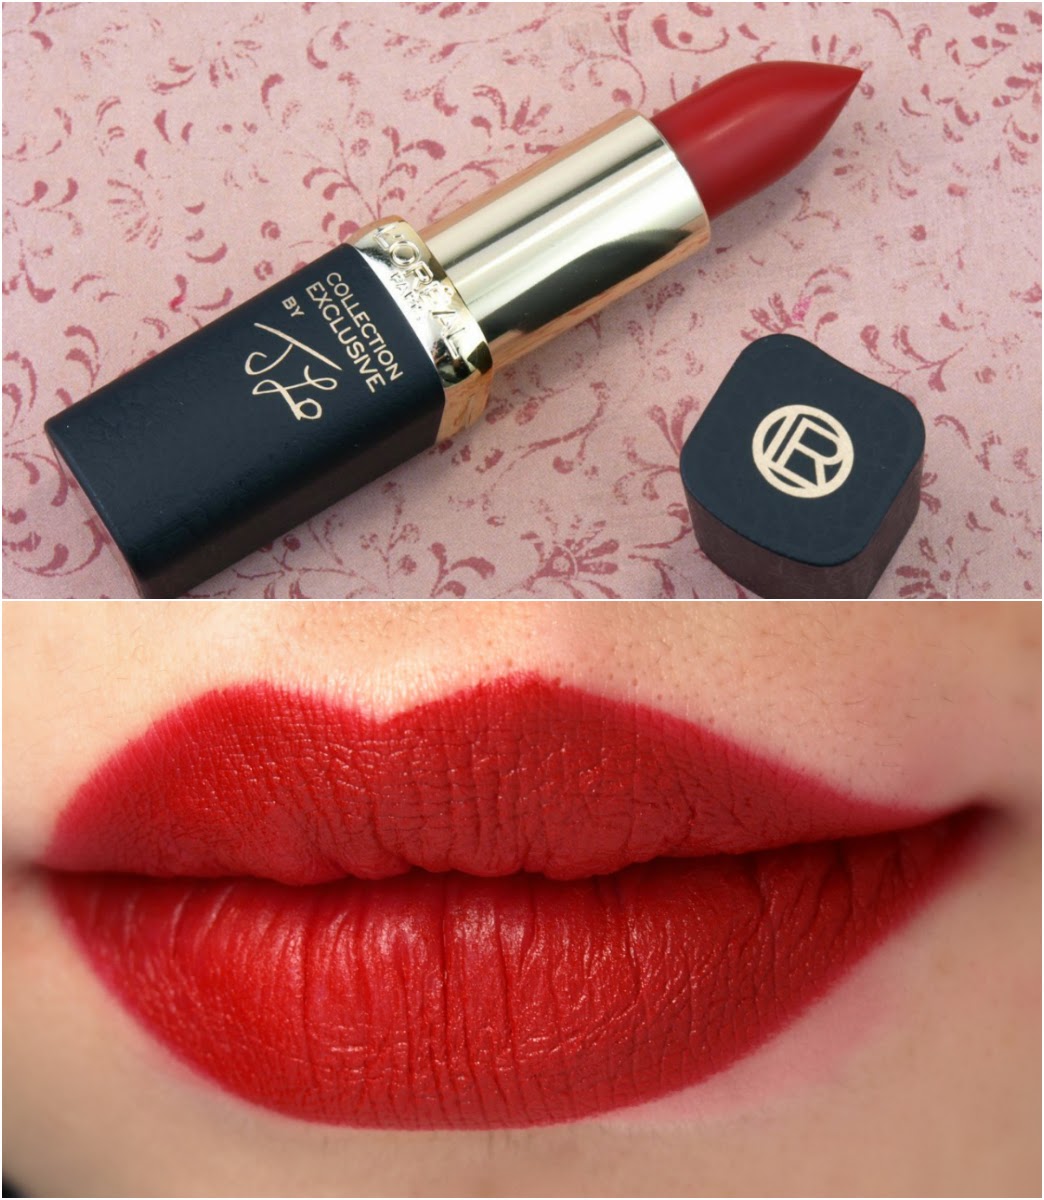 L'Oreal Collection Exclusive Pure Reds by Color Riche Lipsticks: Review and Swatches